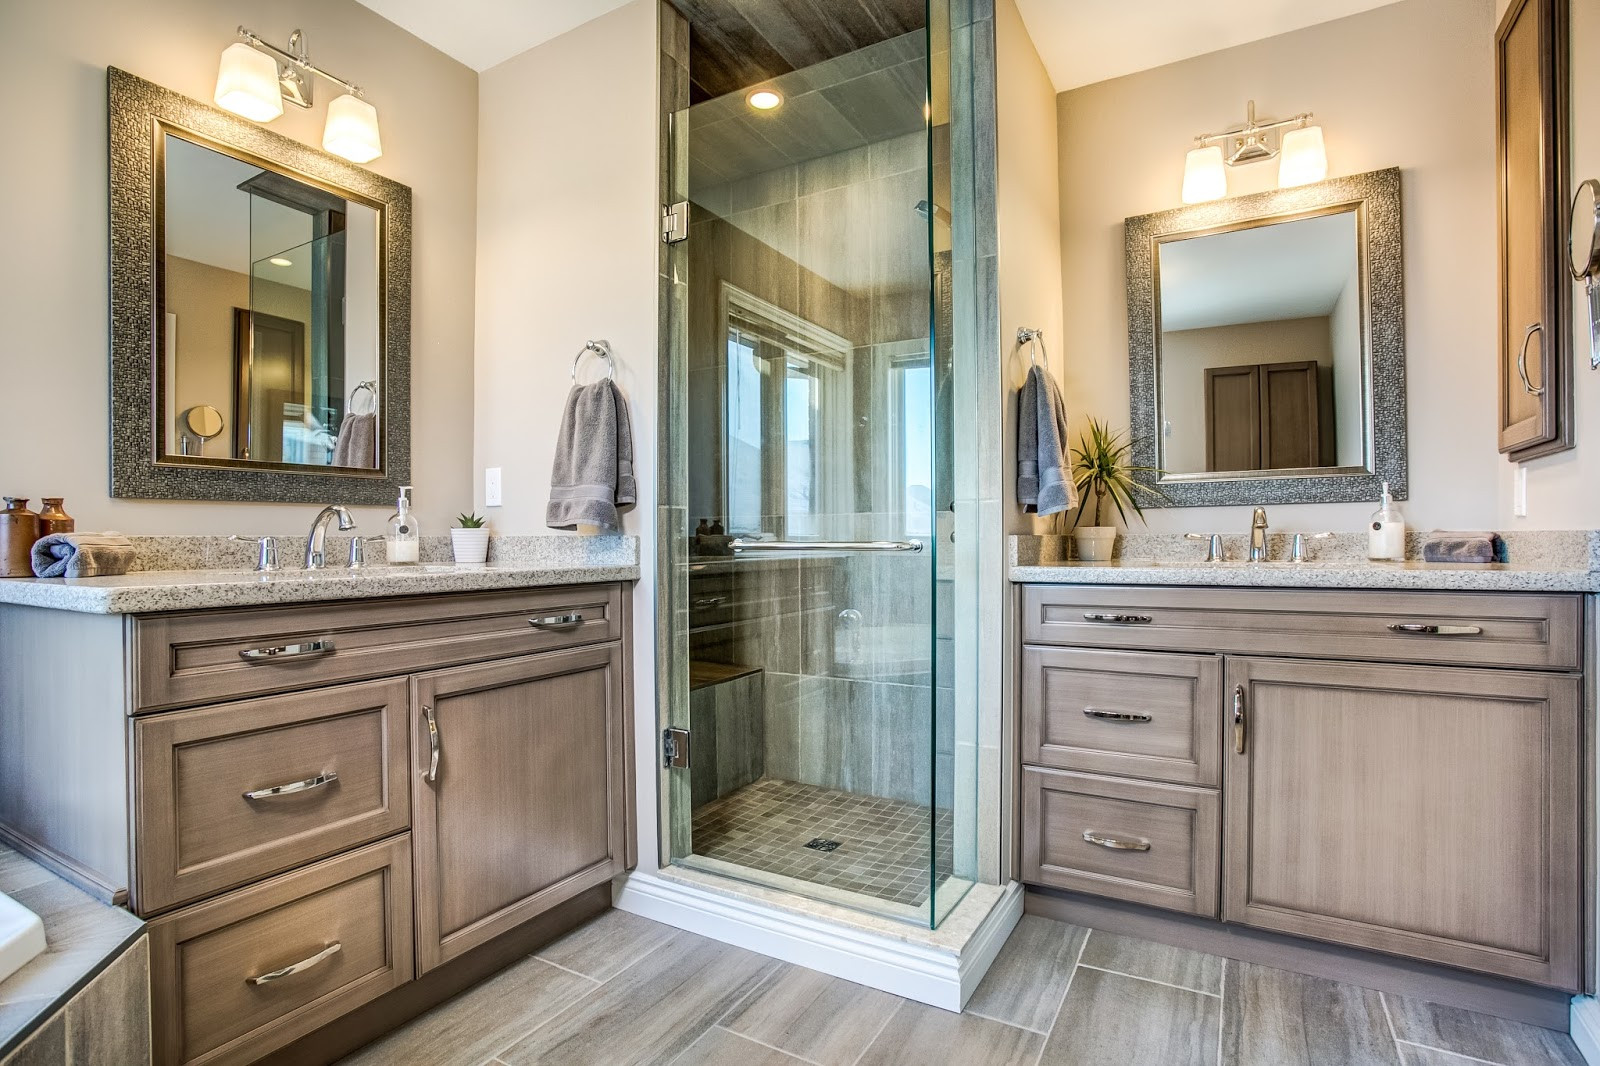 Bathroom Remodel Prices Inspirational Bathroom Remodel Cost Bud Average Luxury – Home